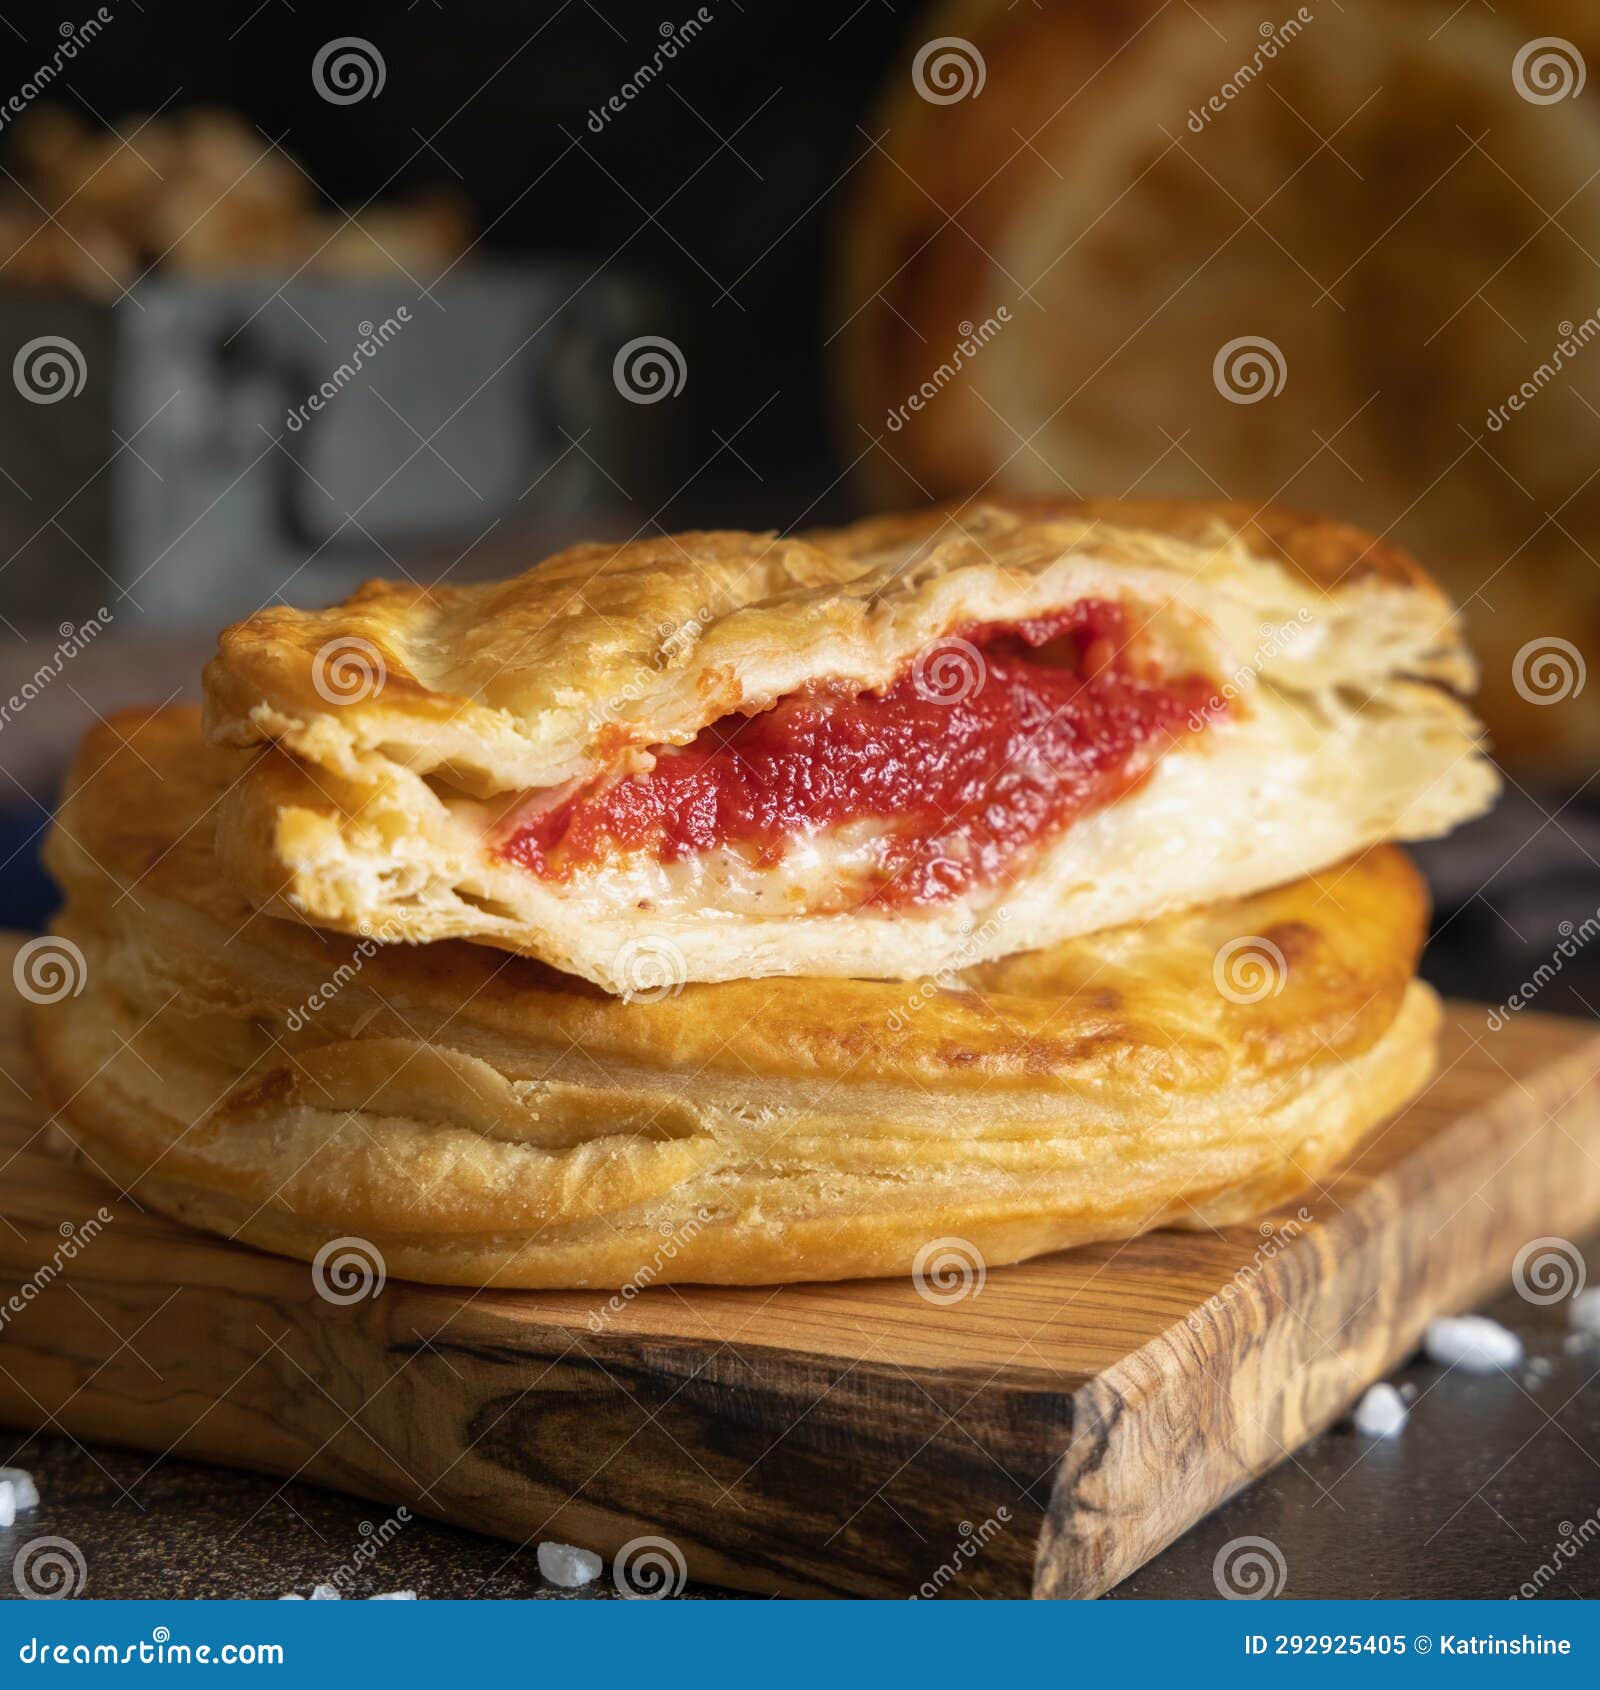 rustico puff pastry from lecce filled with stuffed with tomato, mozzarella and bechamel sauce